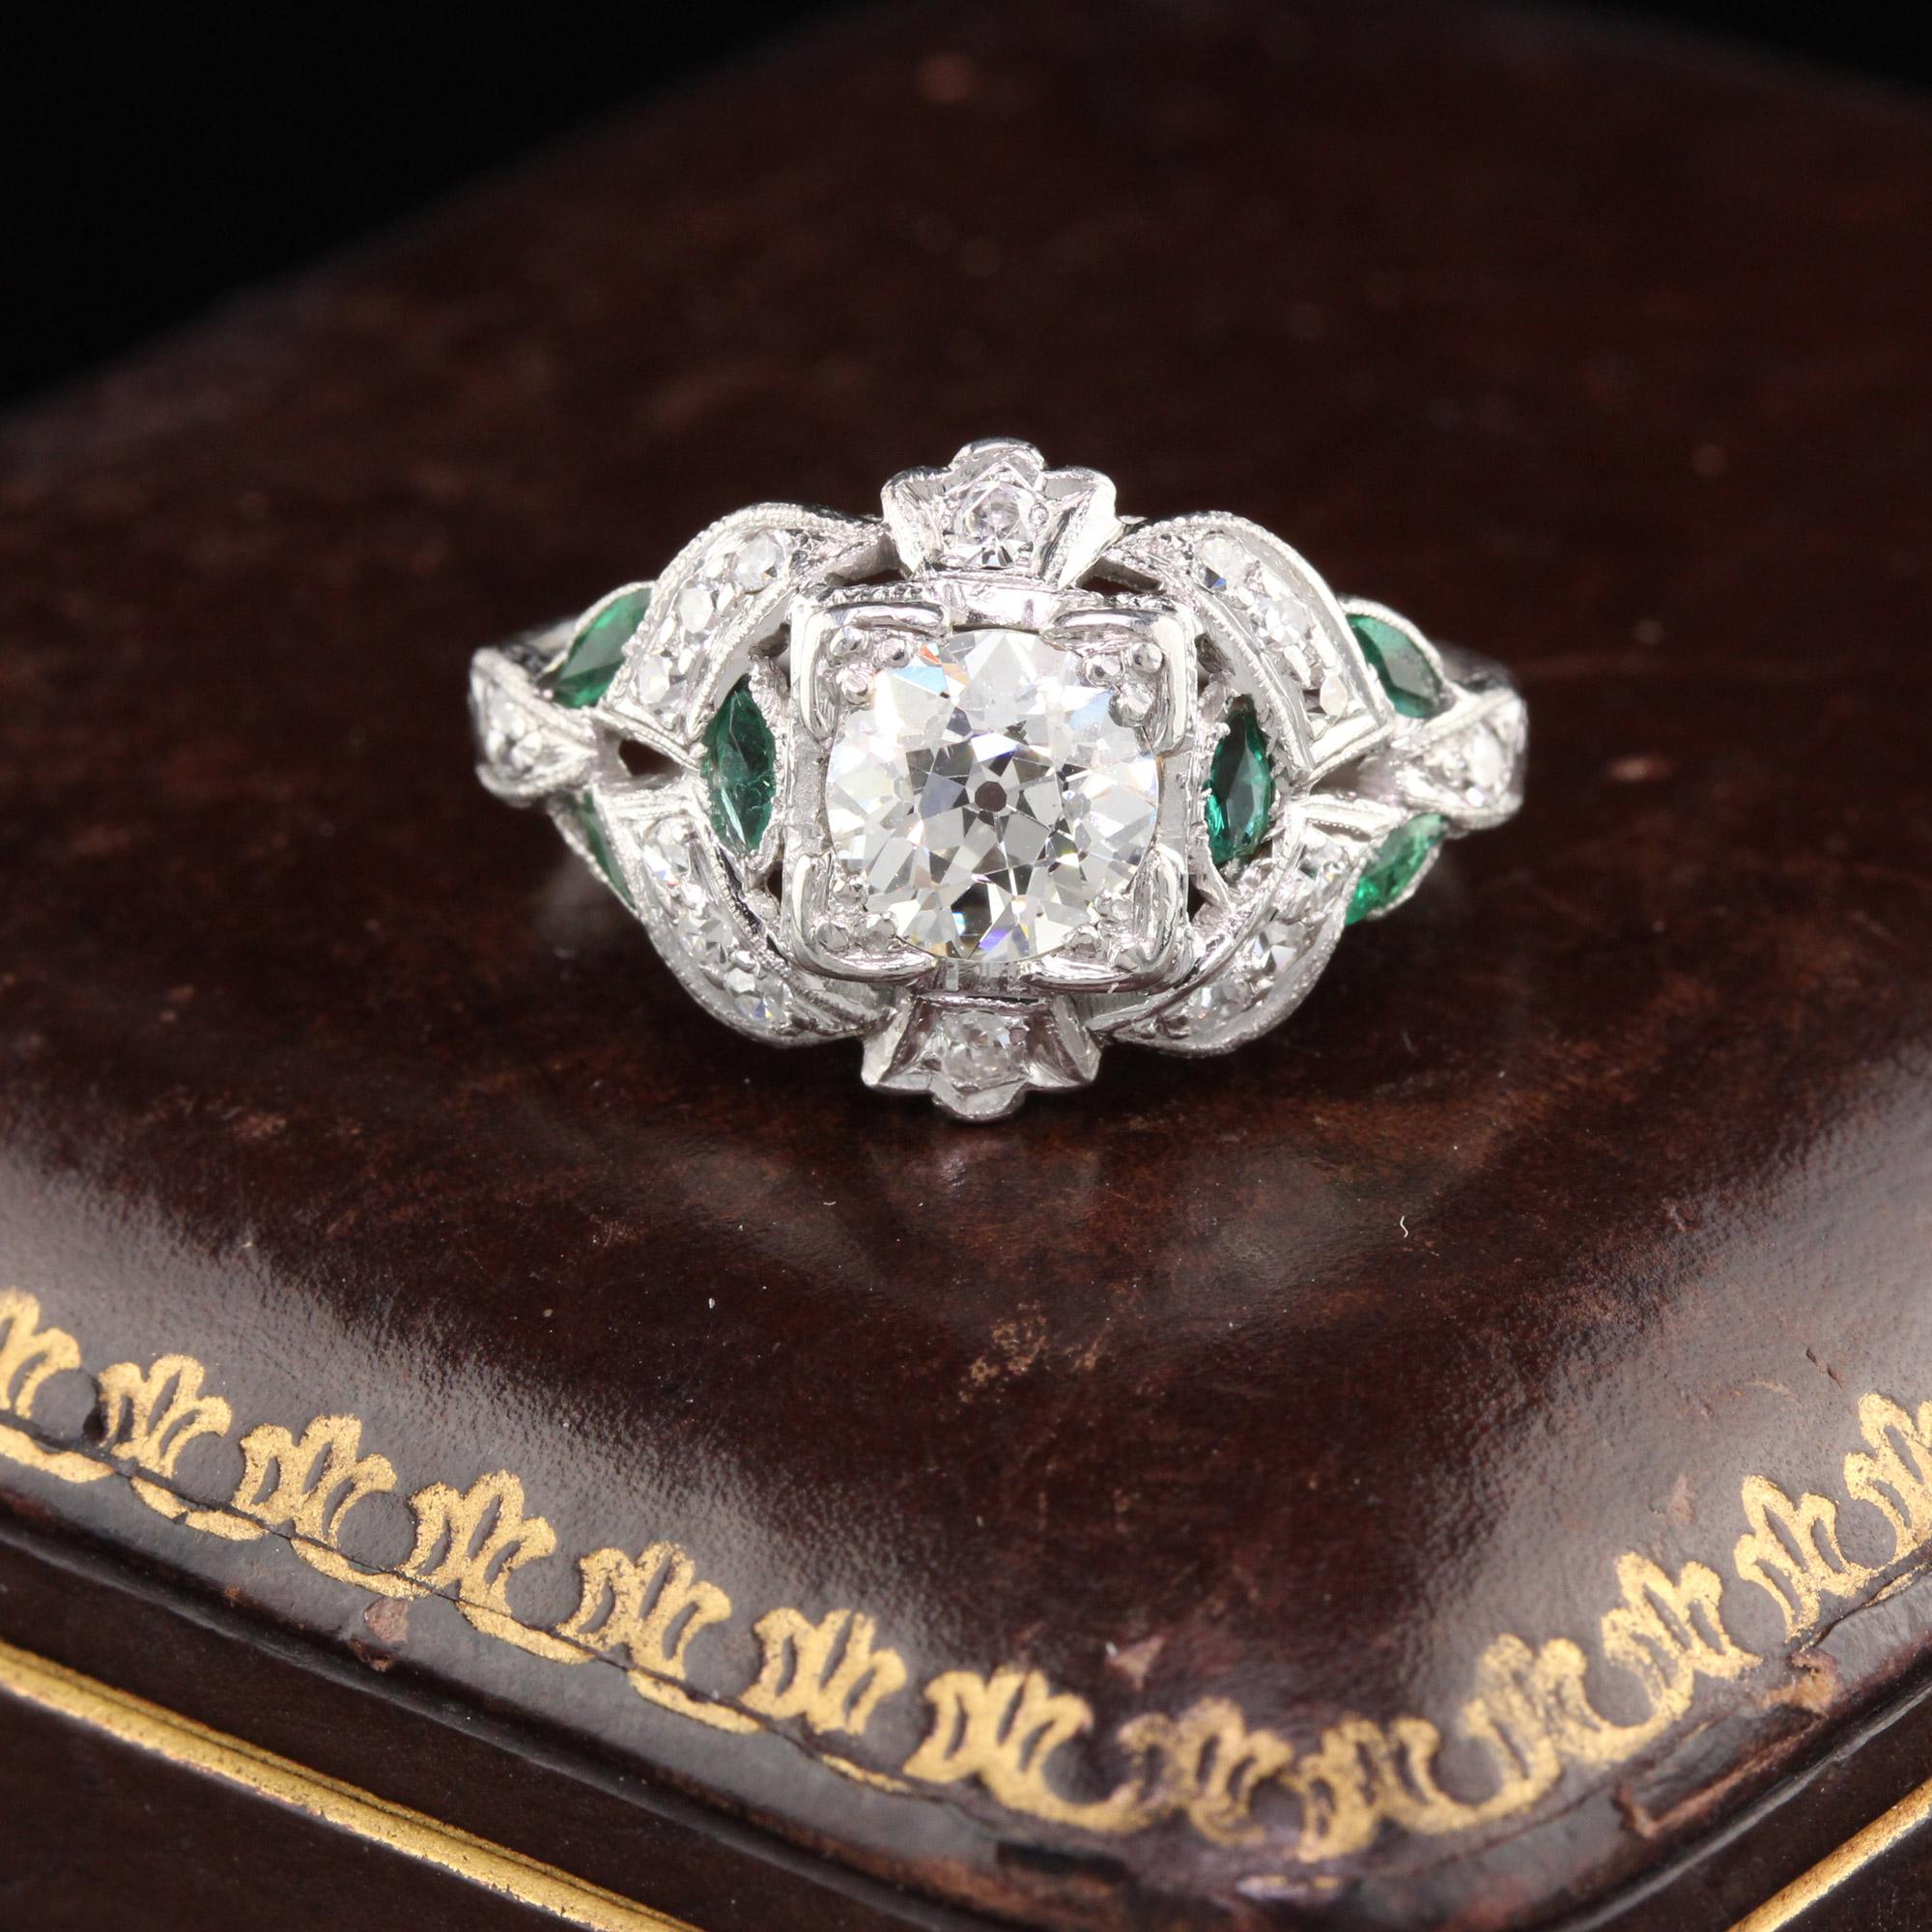 Gorgeous Art Deco engagement ring done in platinum with an old european cut diamond in the center in a diamond and emerald mounting.

#R0255

Metal: Platinum

Weight: 4.1 Grams

Center Diamond Weight: Approximately 0.90 cts 

Center Diamond Color: